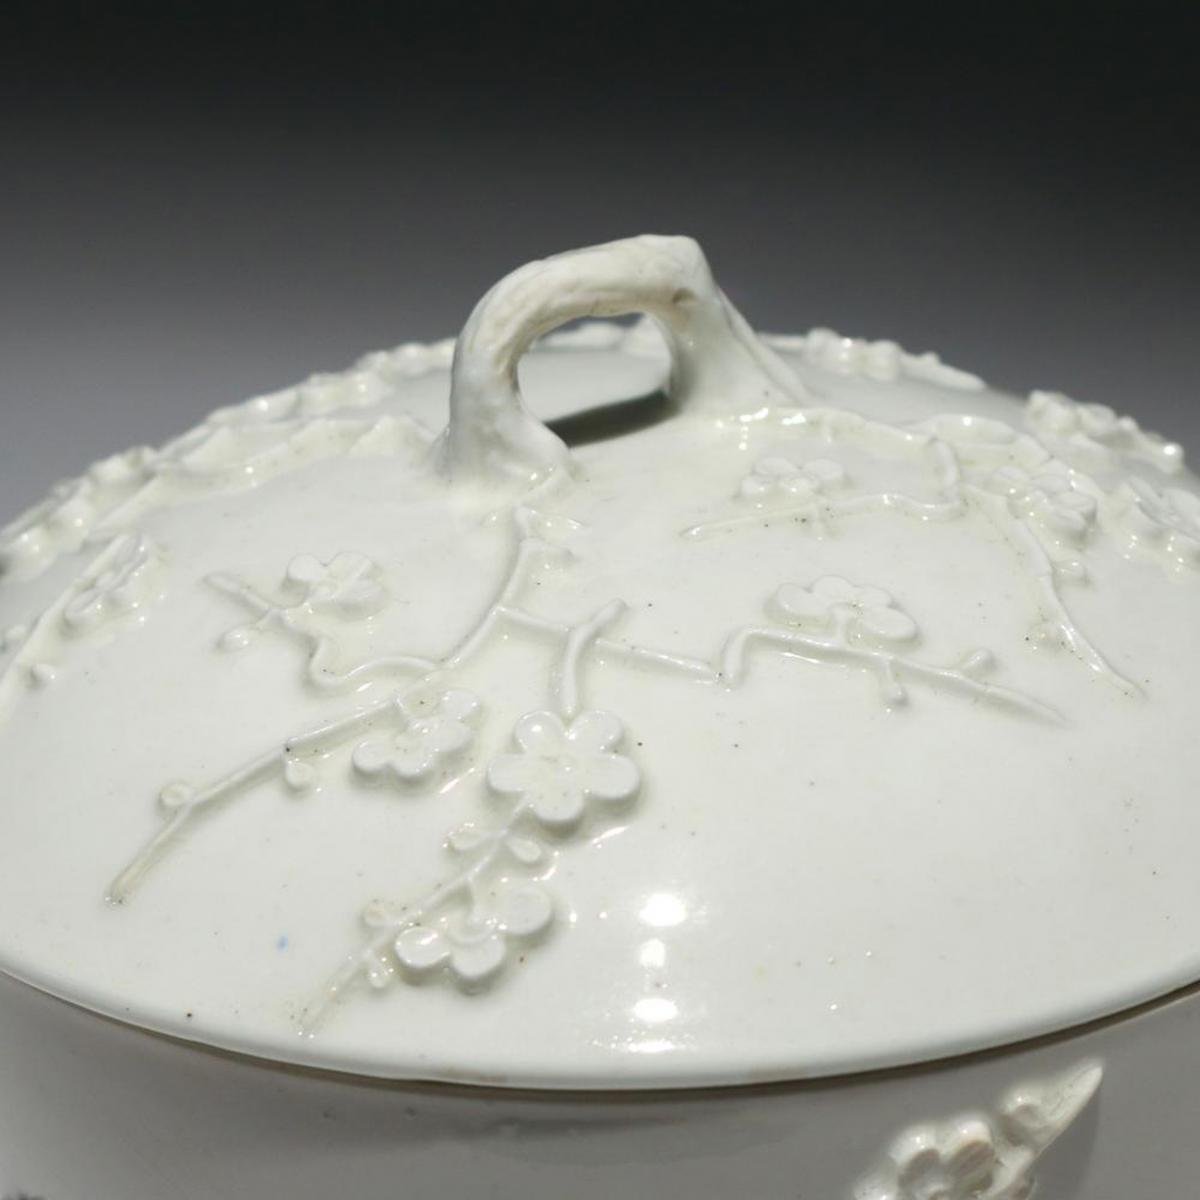 18th Century Bow Porcelain White Prunus Covered Bowl or Tureen & Cover